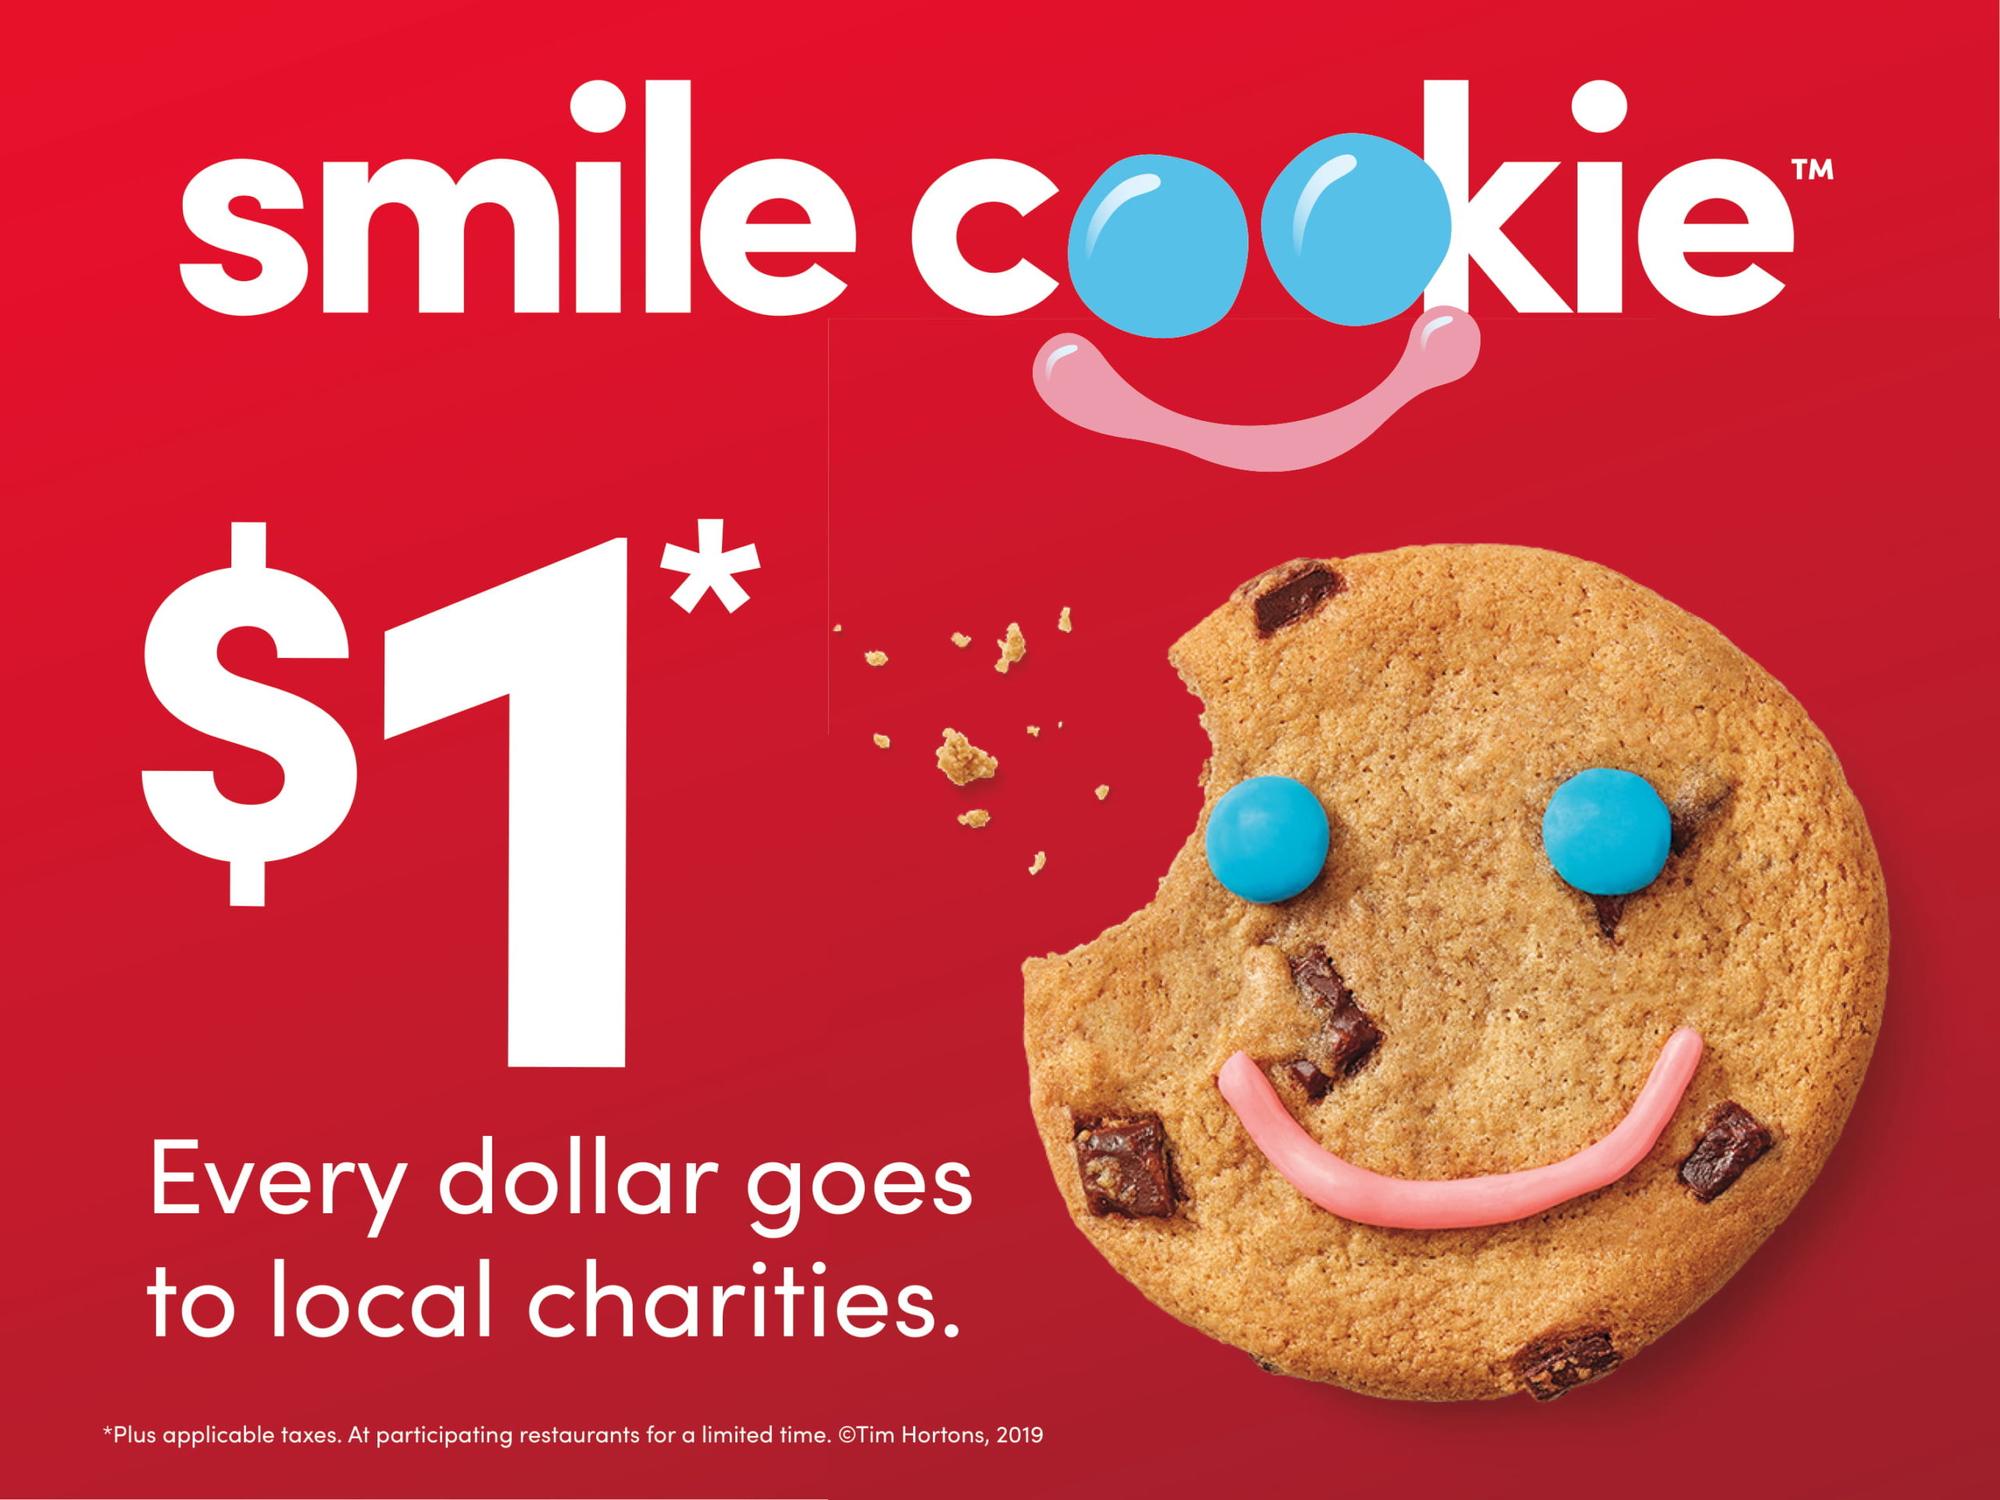 Tim Hortons® Smile Cookie Campaign is back, supporting the Hawkesbury and District General Hospital Foundation